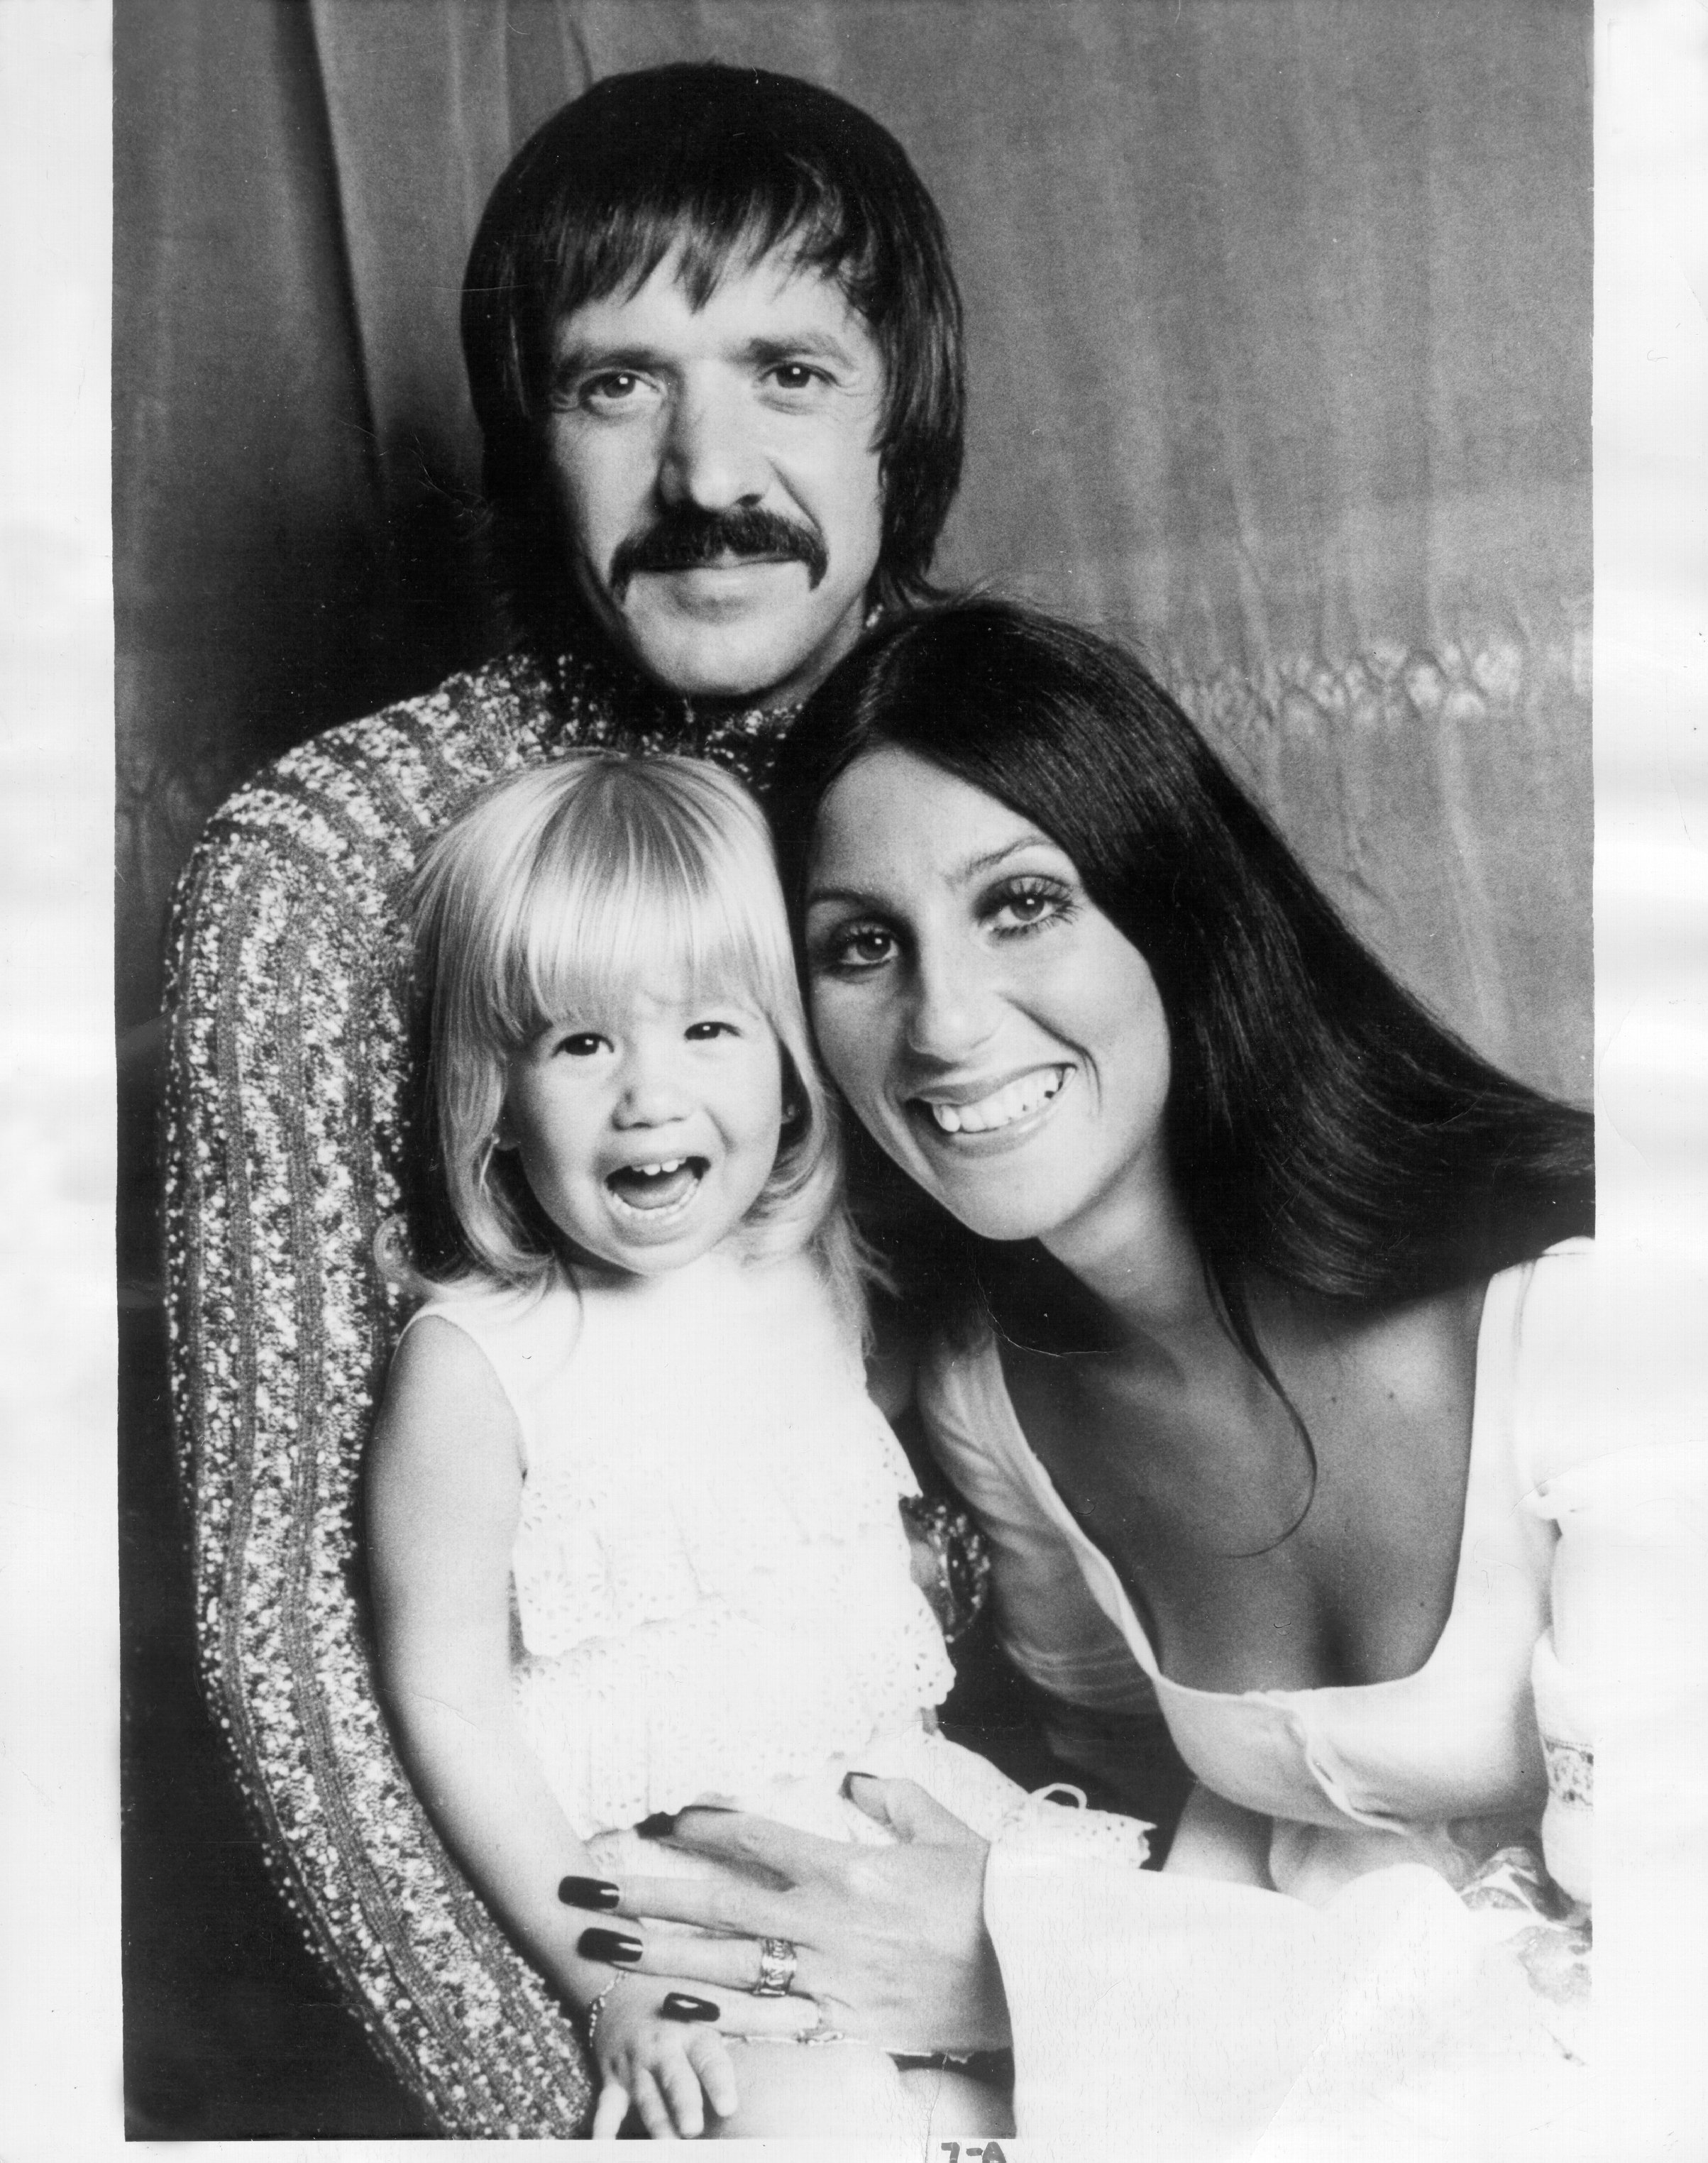  Sonny Bono and Cher with their son Chaz Bono circa 1970 | Source: Getty Images 